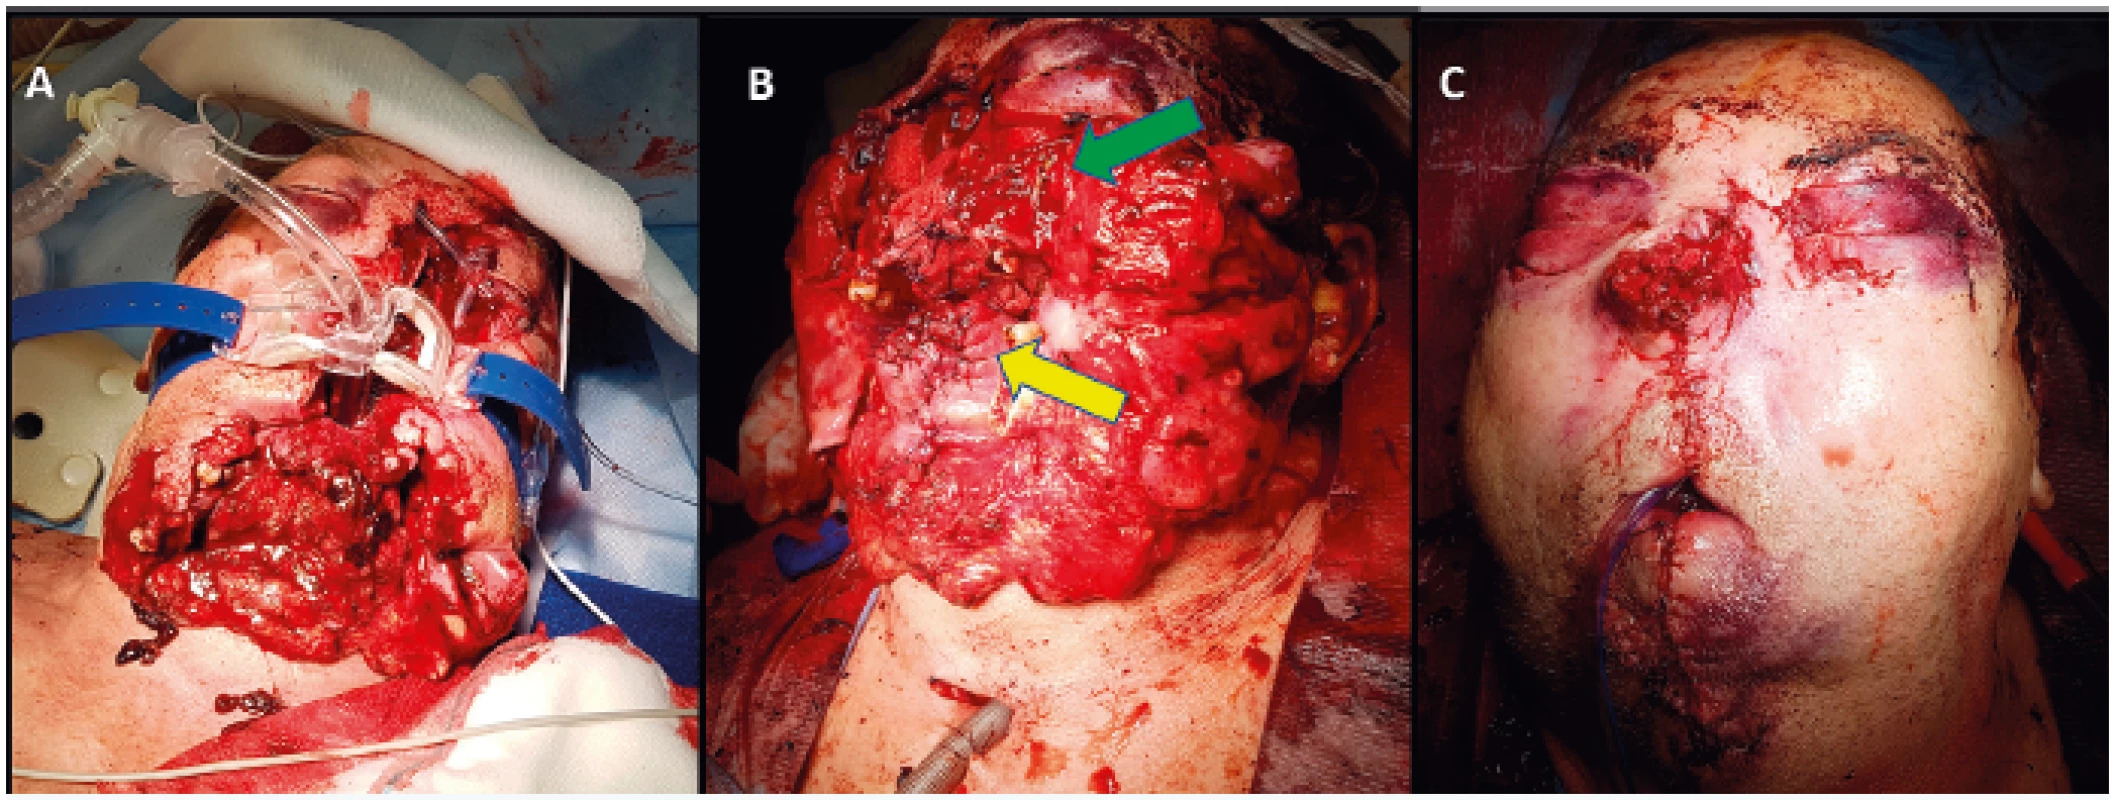 A) A patient intubated through his mouth following a gunshot injury to the face who was brought to the Accident & Emergency Unit, University Hospital Ostrava. The rigid cervical collar was already removed following a CT examination. B) The patient in the surgical theatre with tracheostomy and nasal packing due to bleeding; the green arrow indicates a primarily reconstructed maxilla and palate, the yellow arrow a reconstructed tongue. A loss injury to the mandible is obvious. C) Primary reconstruction of the face, nose and mouth; the lack of soft tissues is apparent (microstoma, notable lack of the nasal tissues)